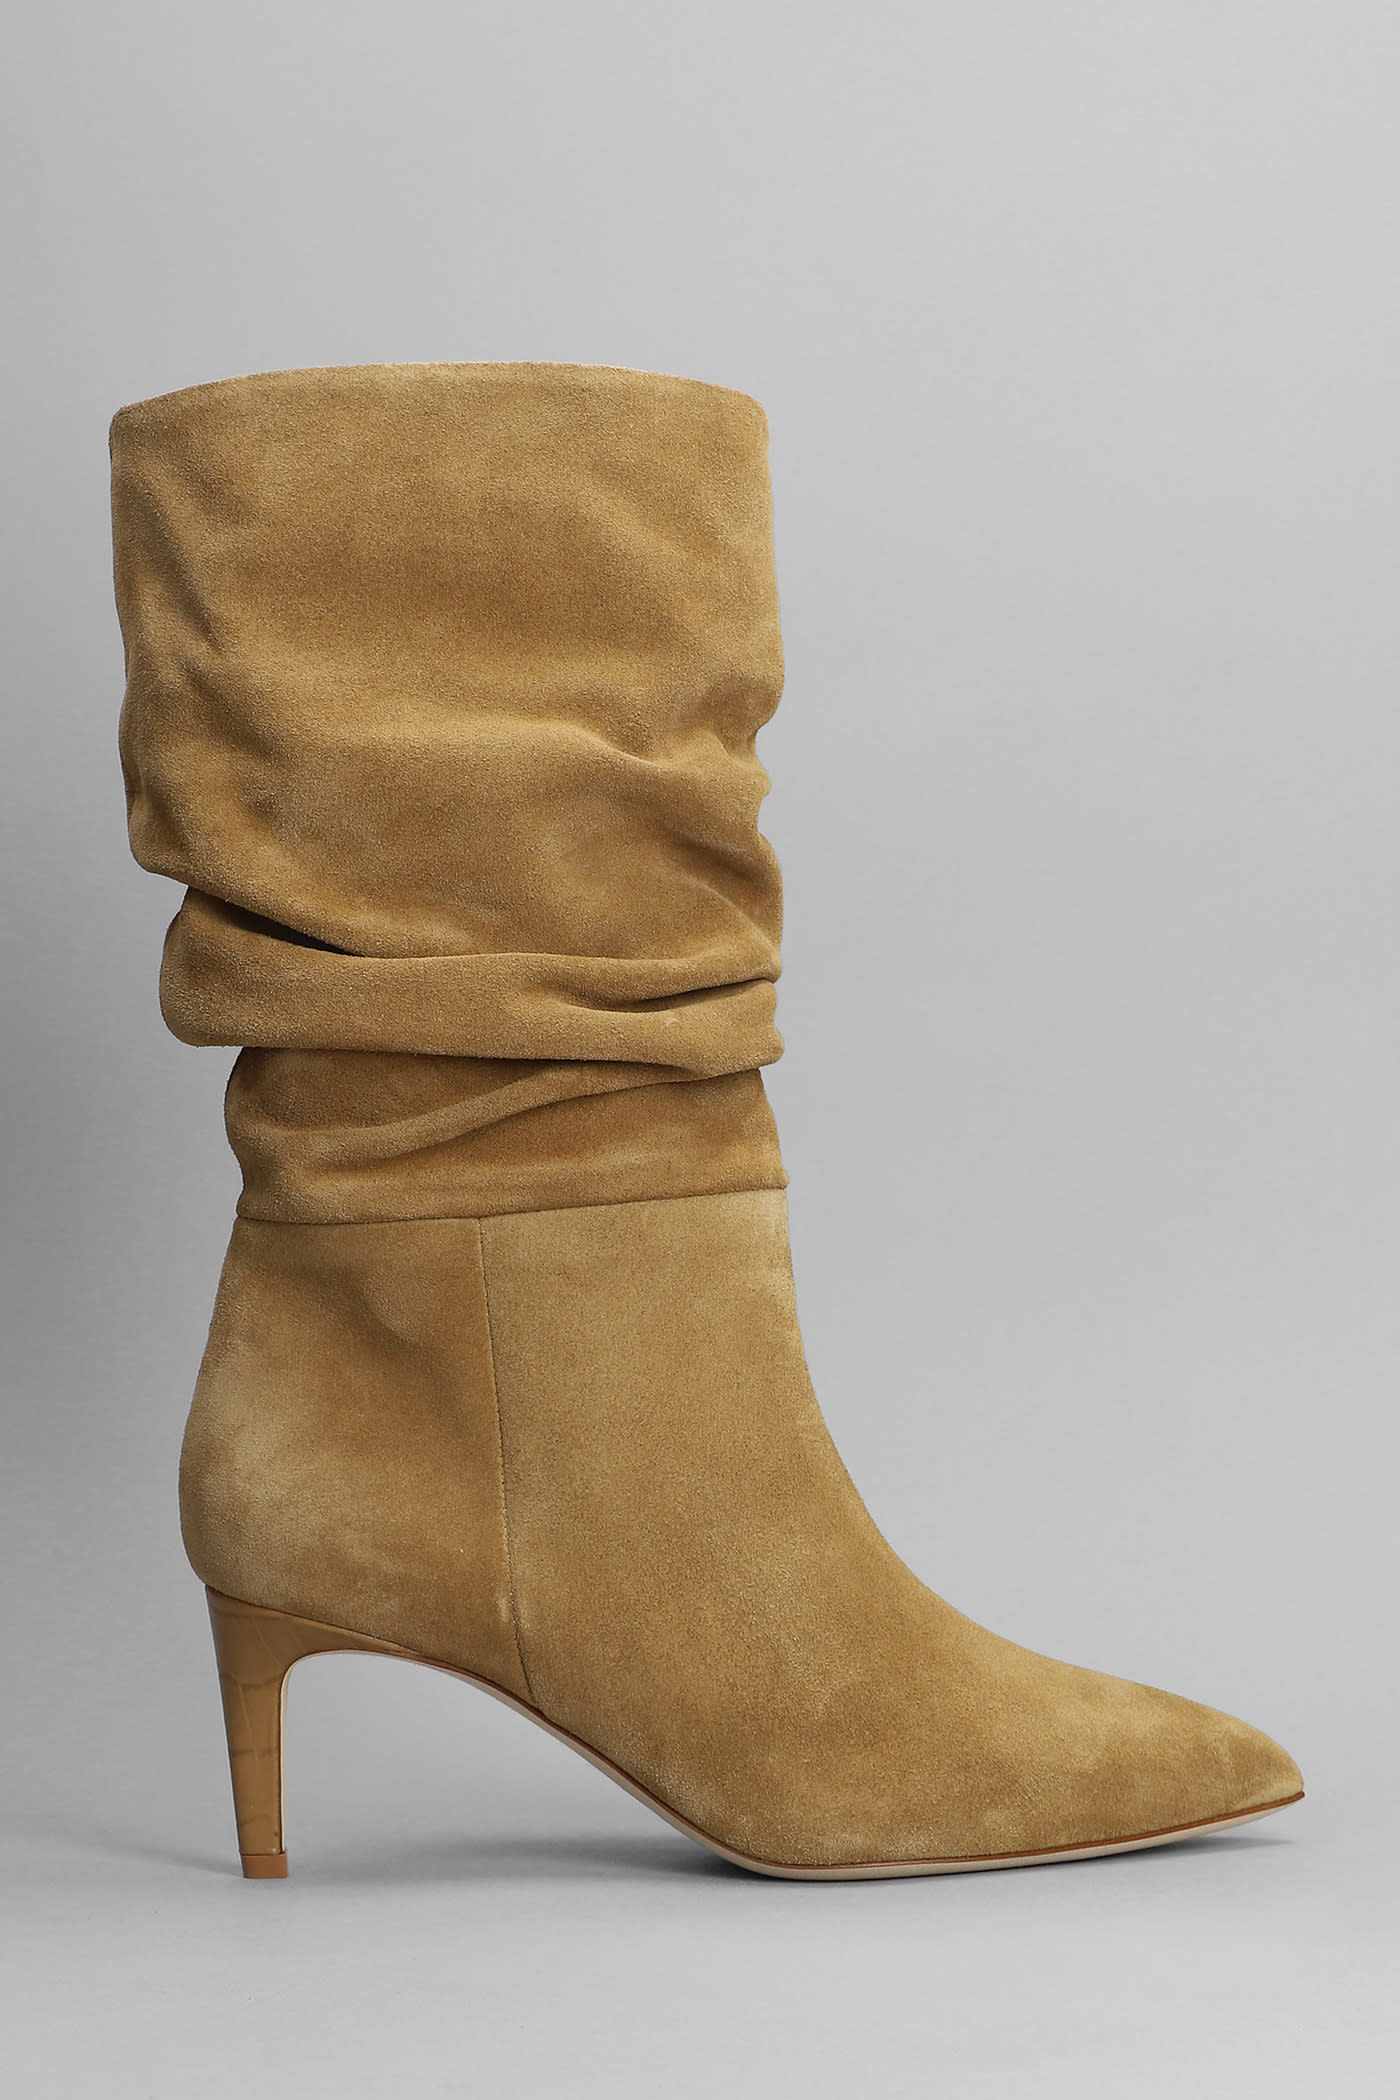 Paris Texas High Heels Ankle Boots In Camel Suede italist, ALWAYS LIKE A  SALE